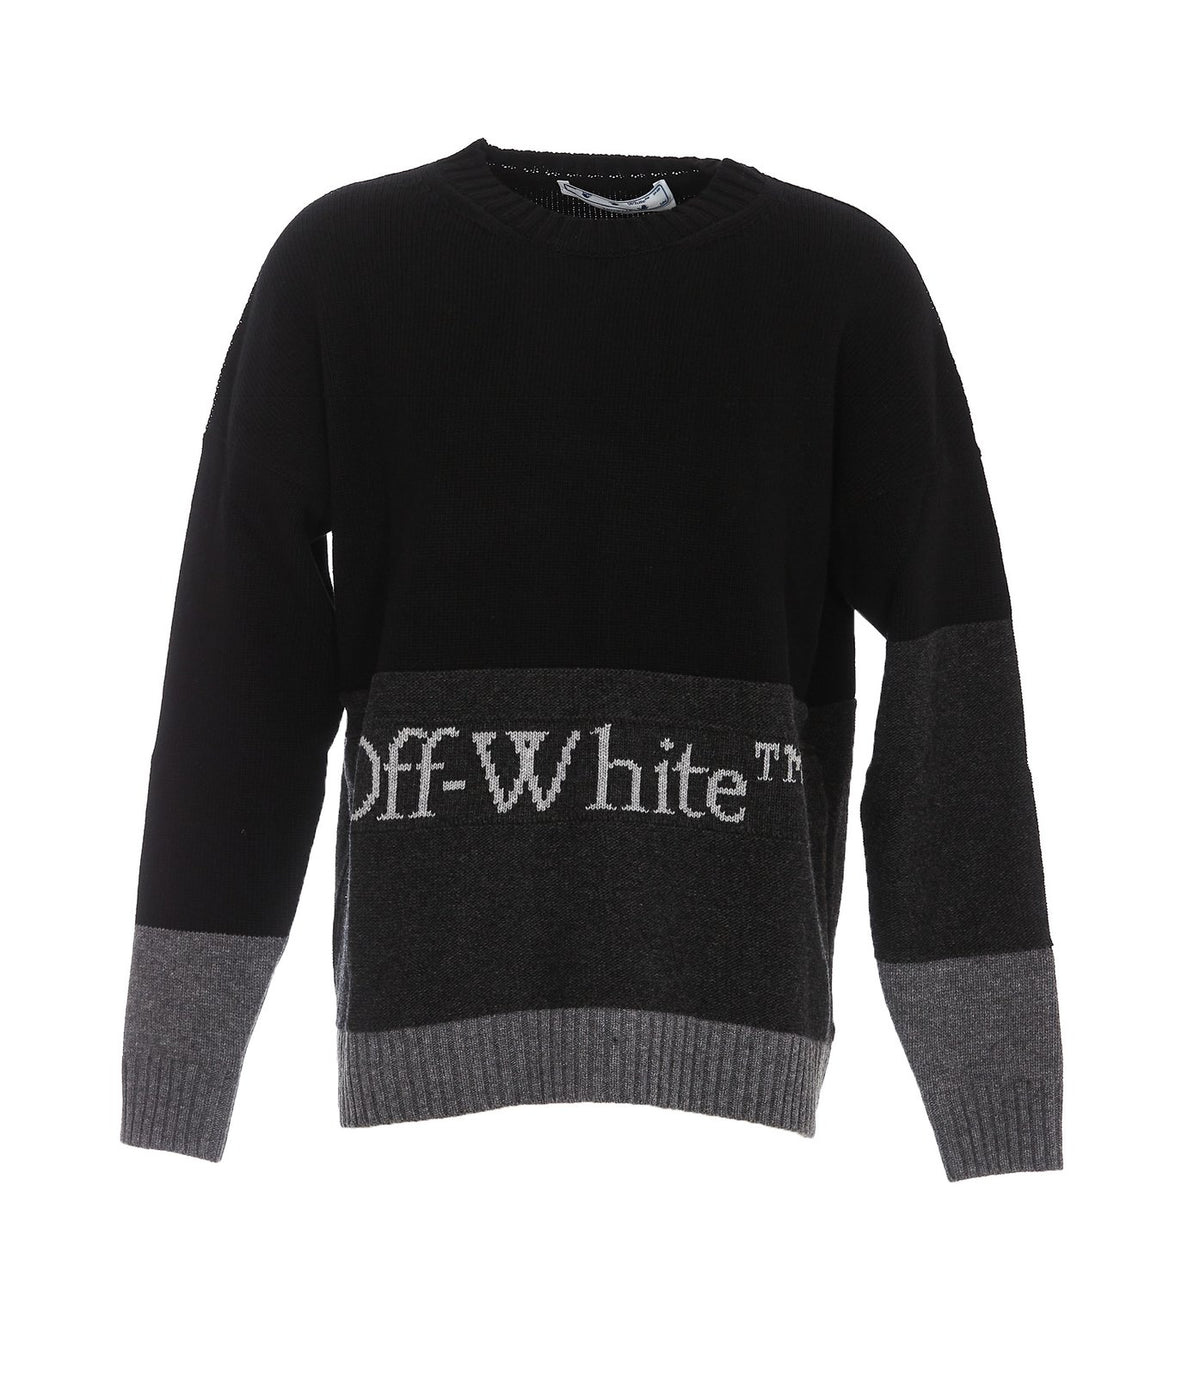 Off-White Logo Intarsia Knitted Jumper